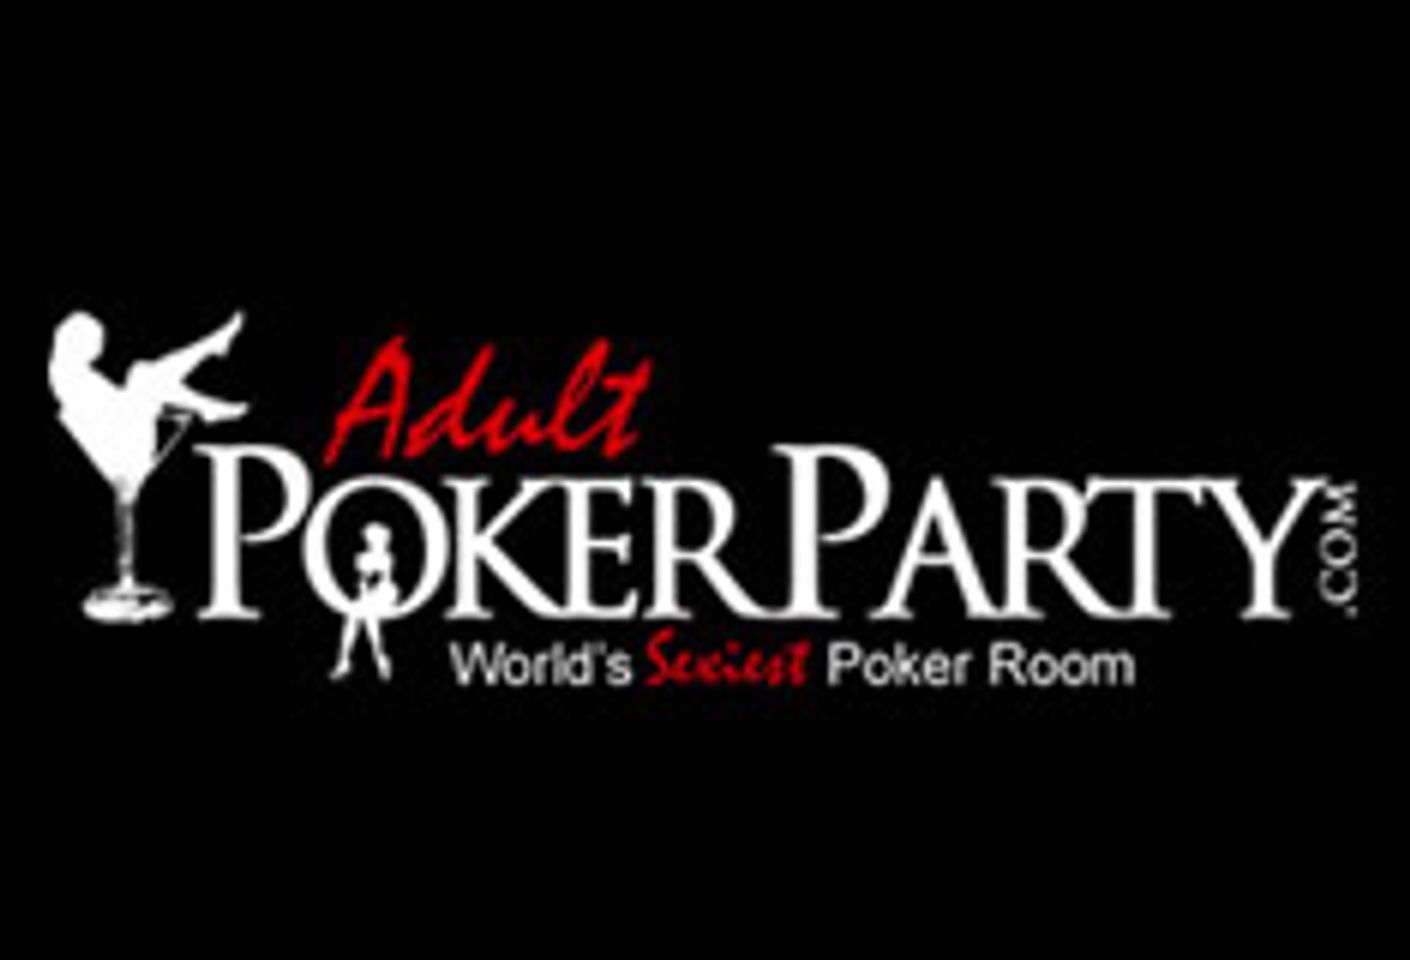 Sunset Thomas Joins Forces With AdultPokerParty.com